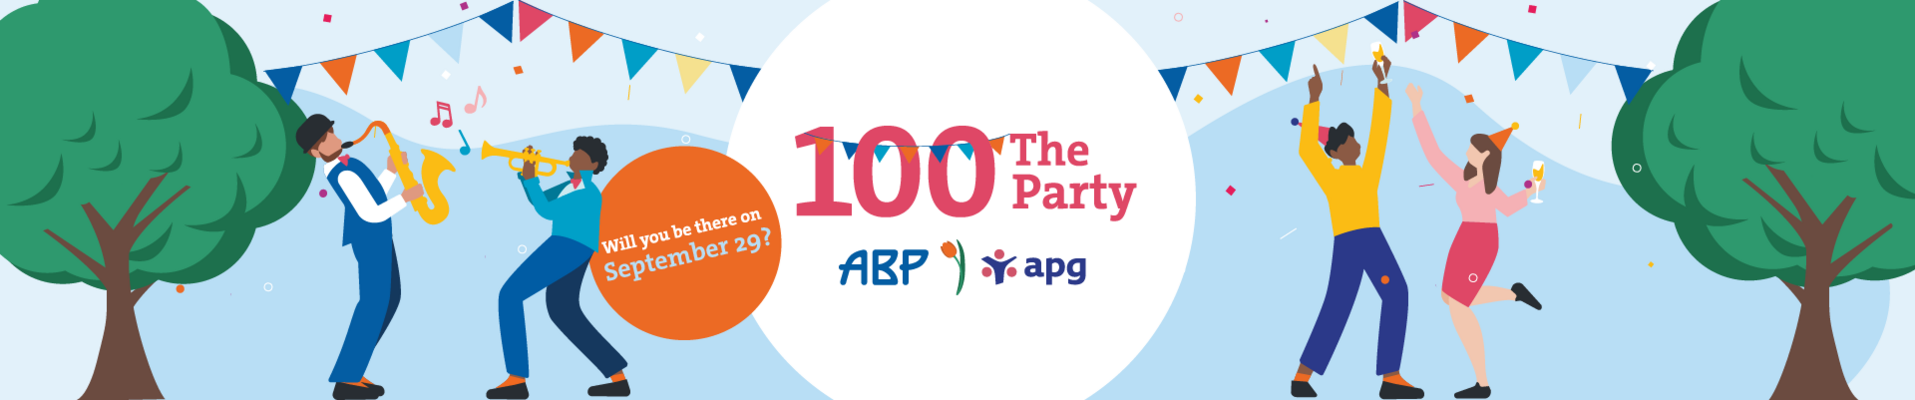 100 - The Party